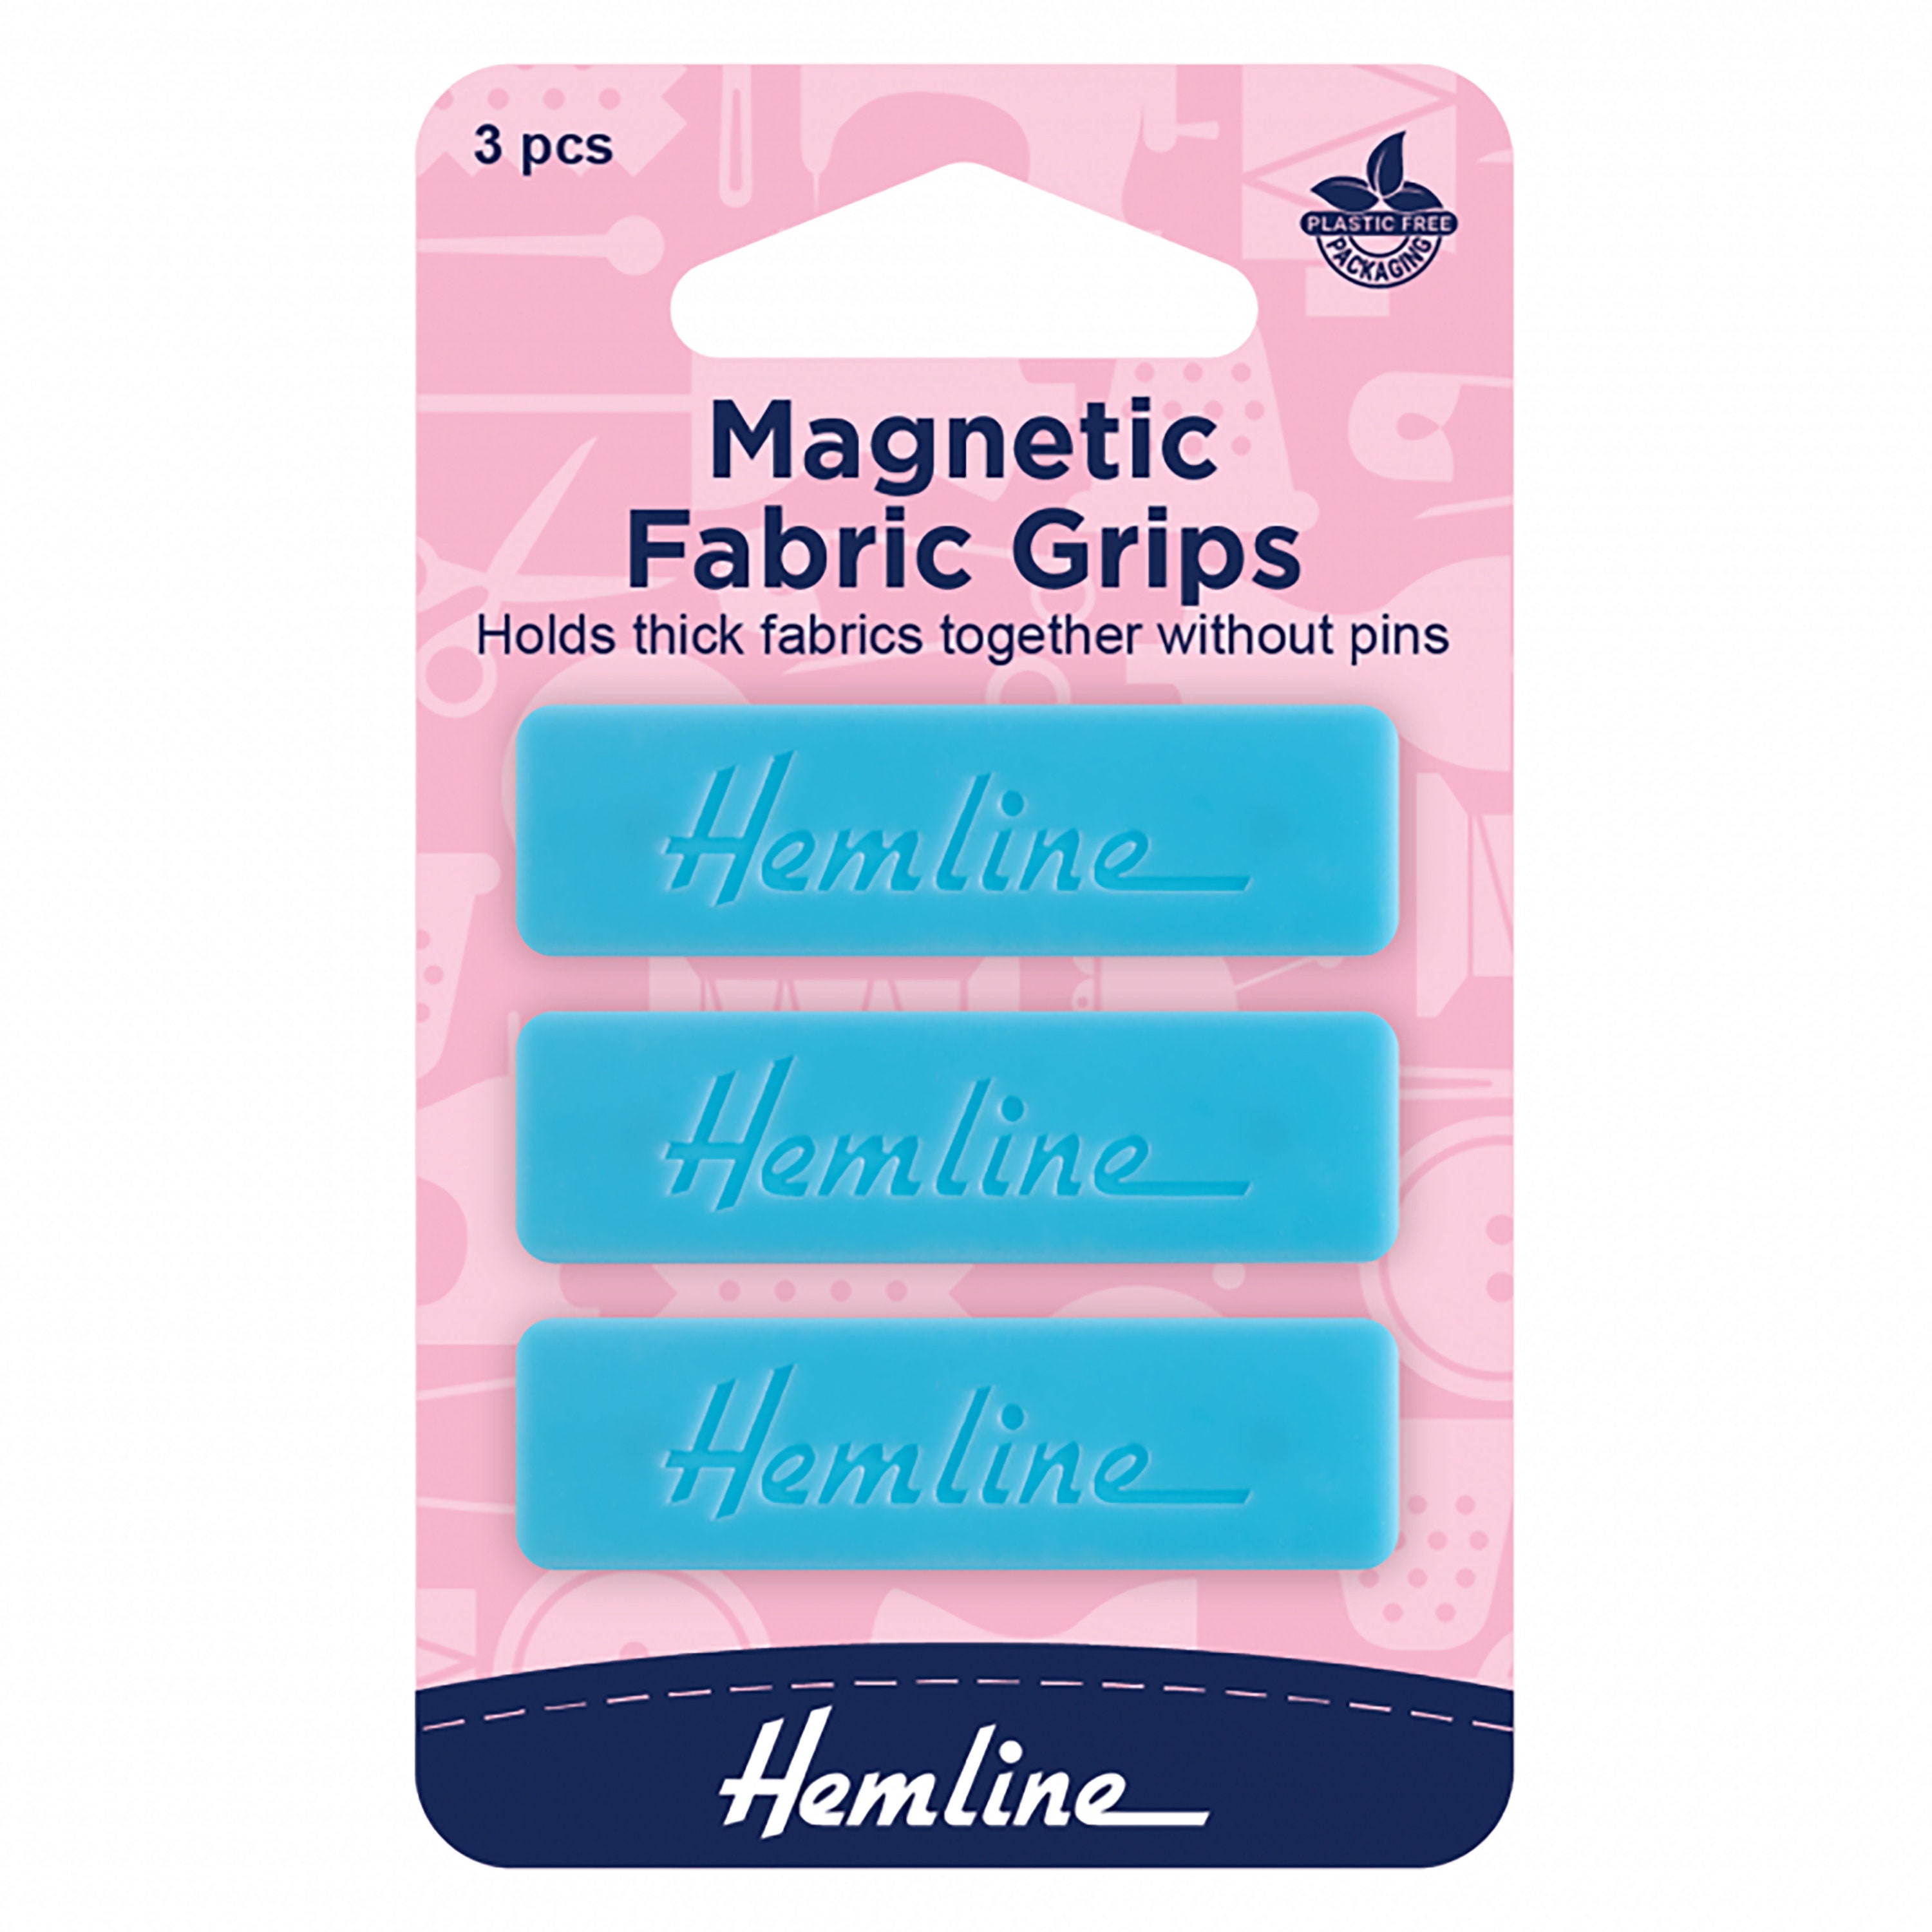 Stitchable Strong Magnetic Buttons or Fasteners for Handbags, Bags